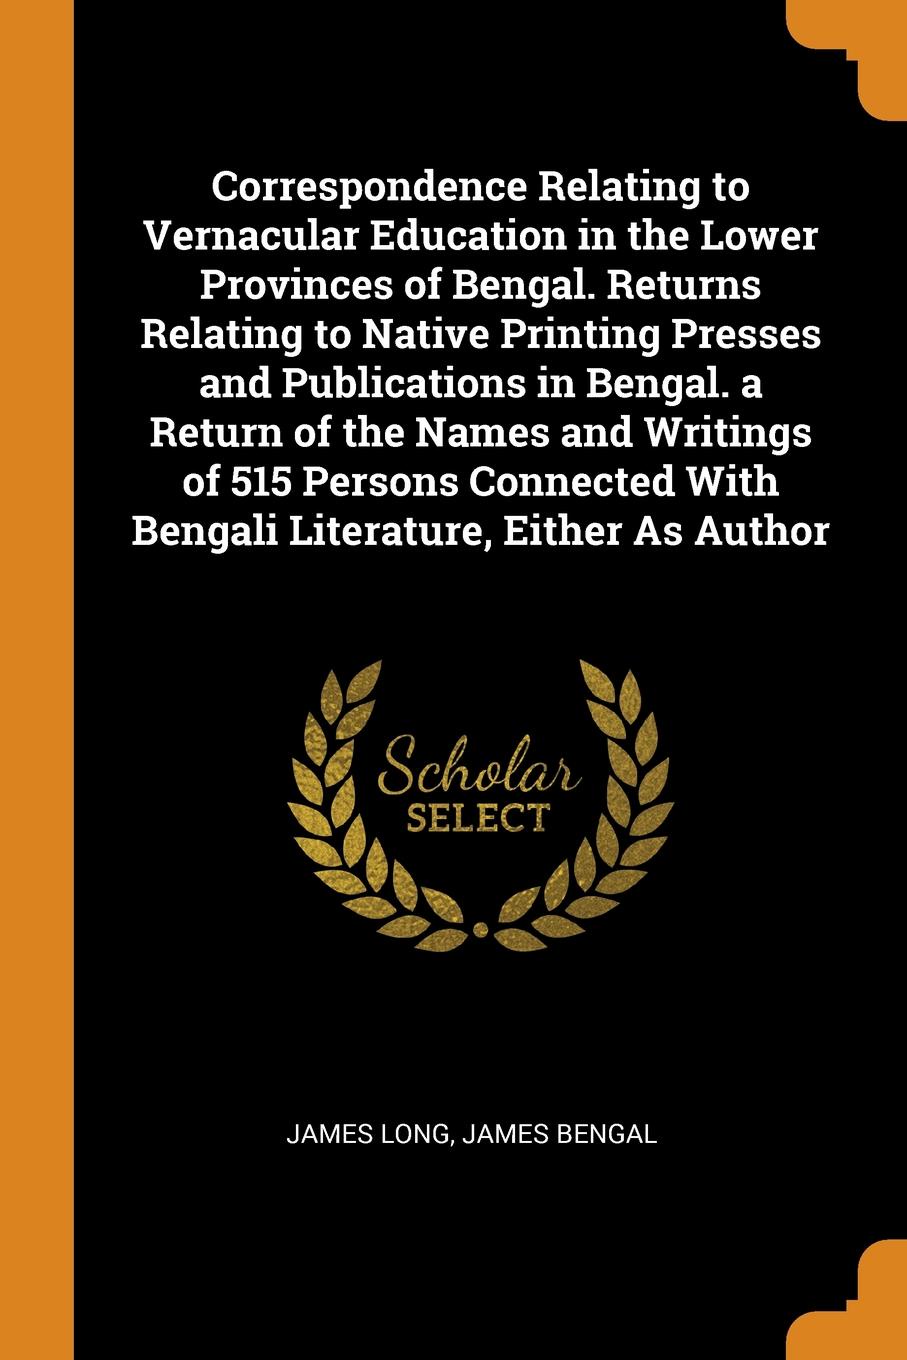 Correspondence Relating to Vernacular Education in the Lower Provinces of Bengal. Returns Relating to Native Printing Presses and Publications in Bengal. a Return of the Names and Writings of 515 Persons Connected With Bengali Literature, Either A...